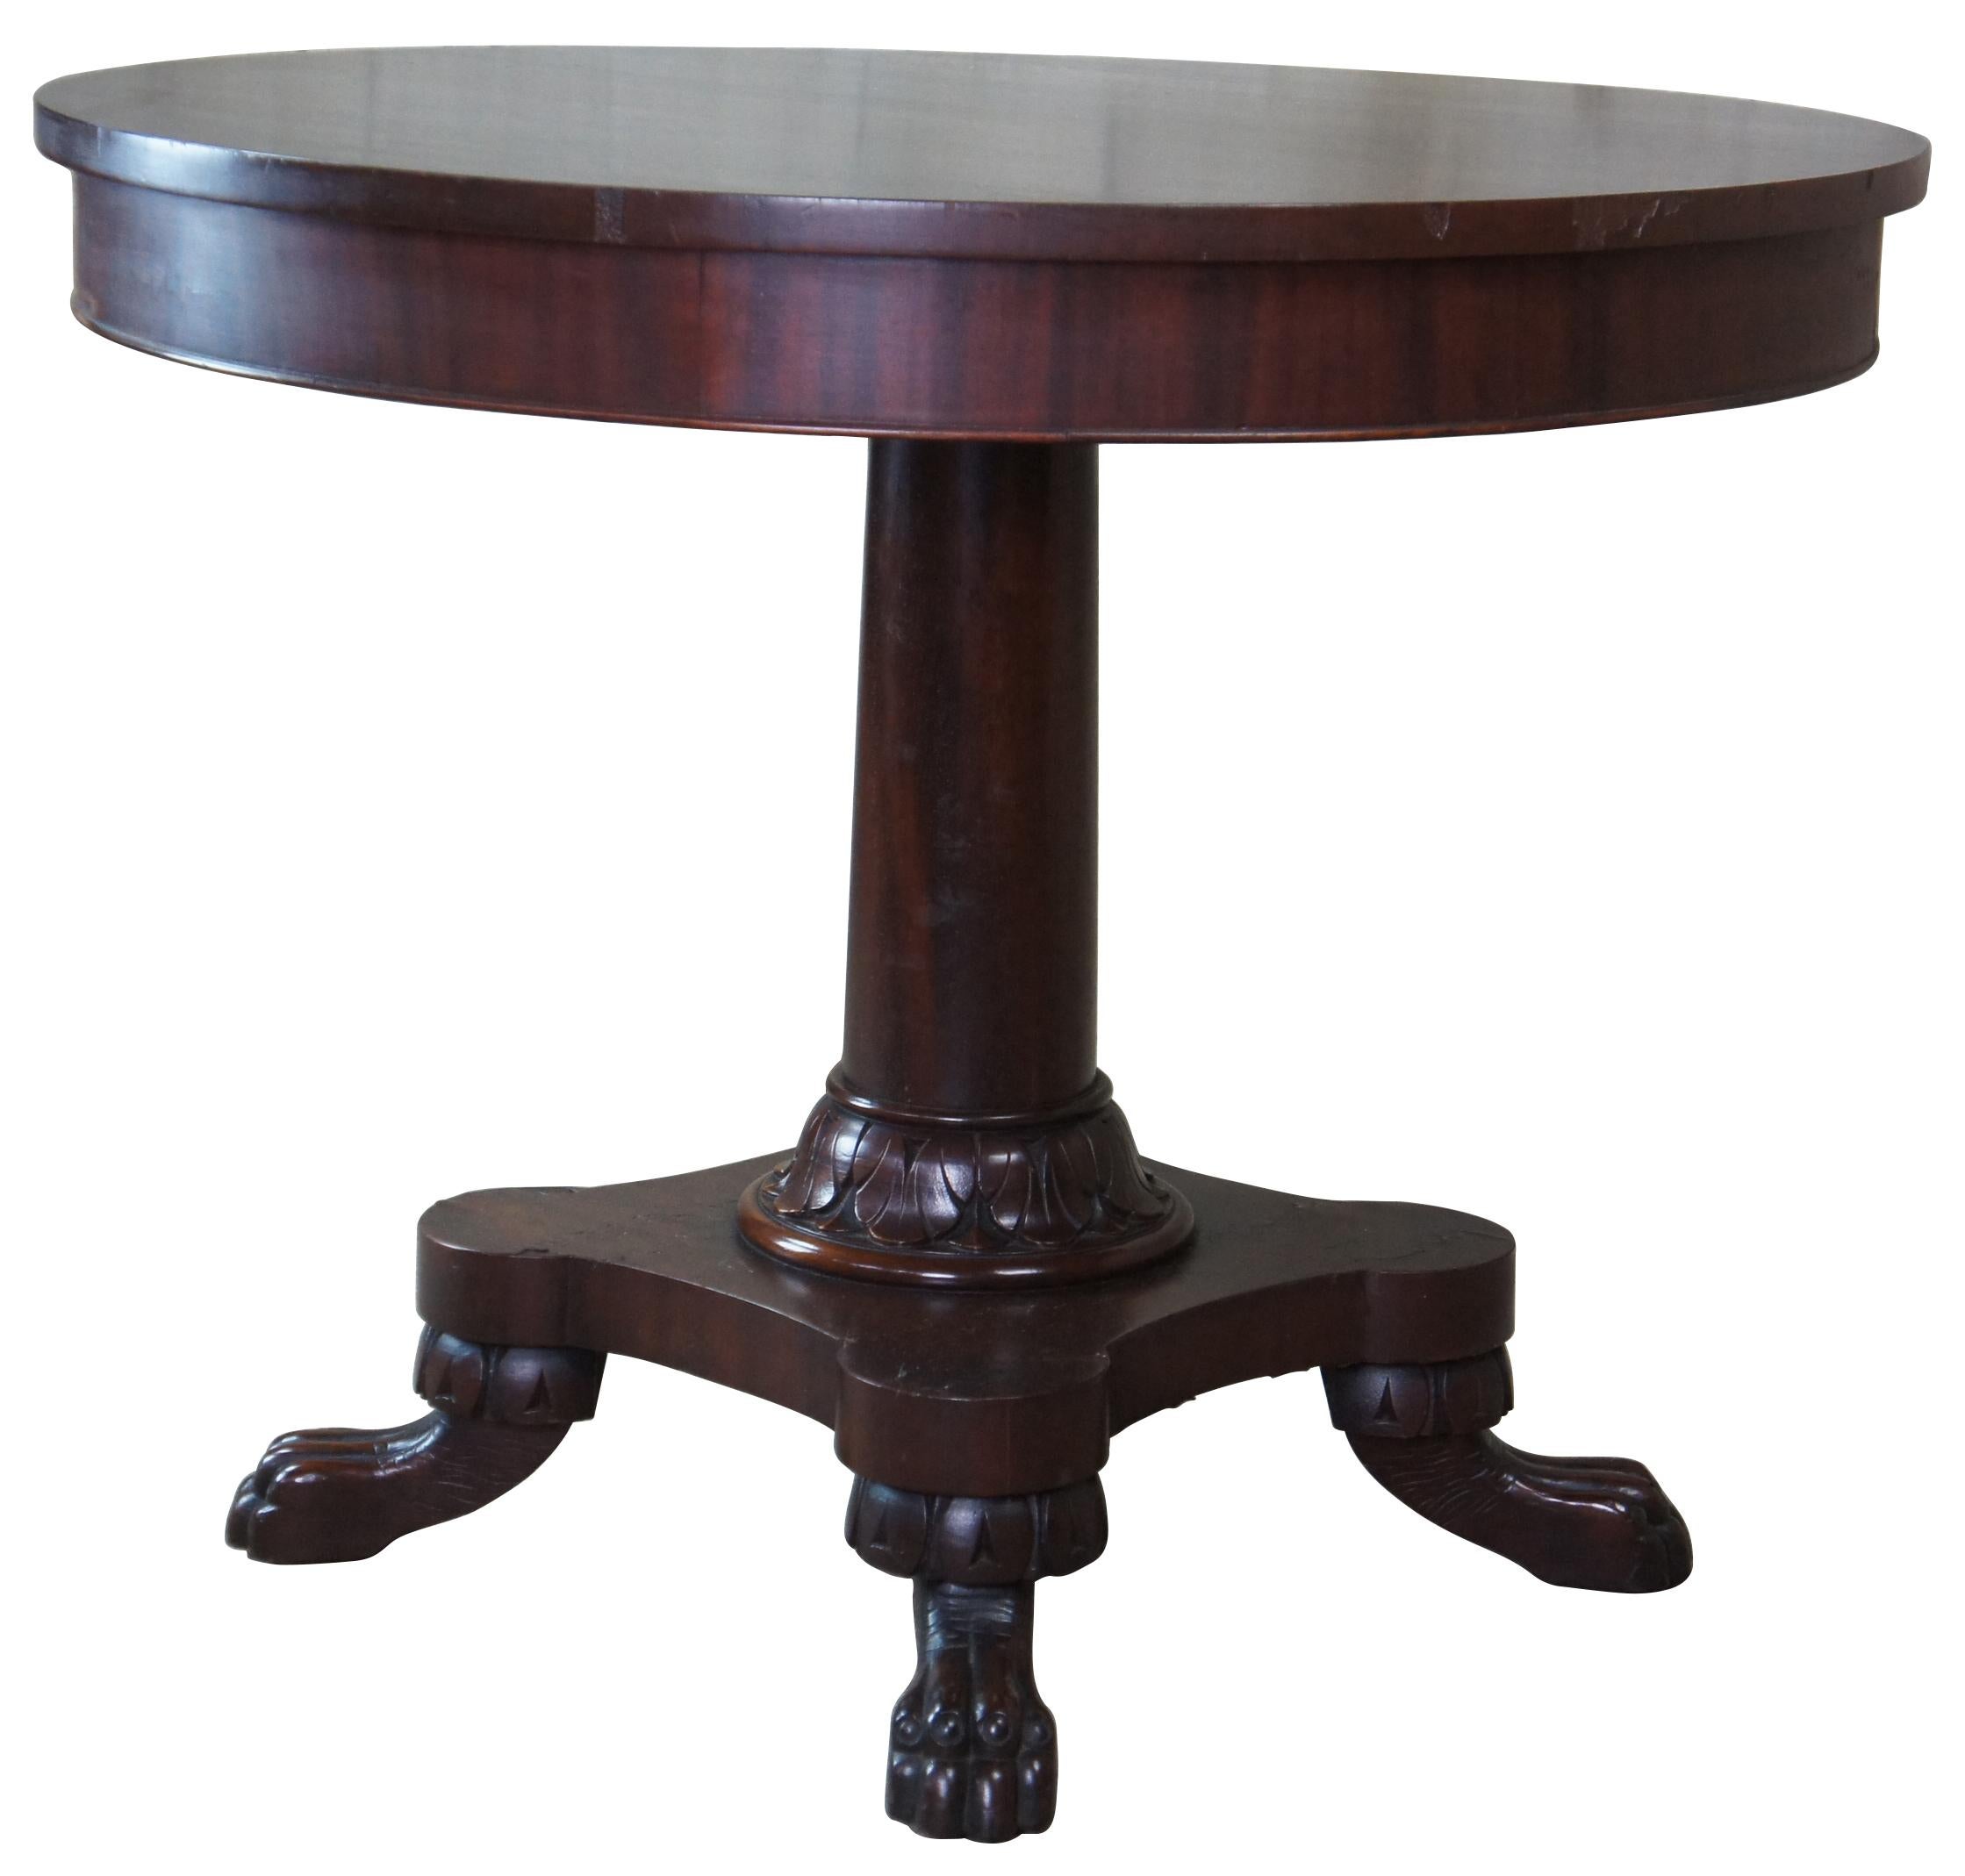 Victorian era center or side table from the last half of the 19th century. A round form made from solid mahogany. Features a turned and graduated center post leading to an acanthus carved capital over lion paw foot carved base.
        